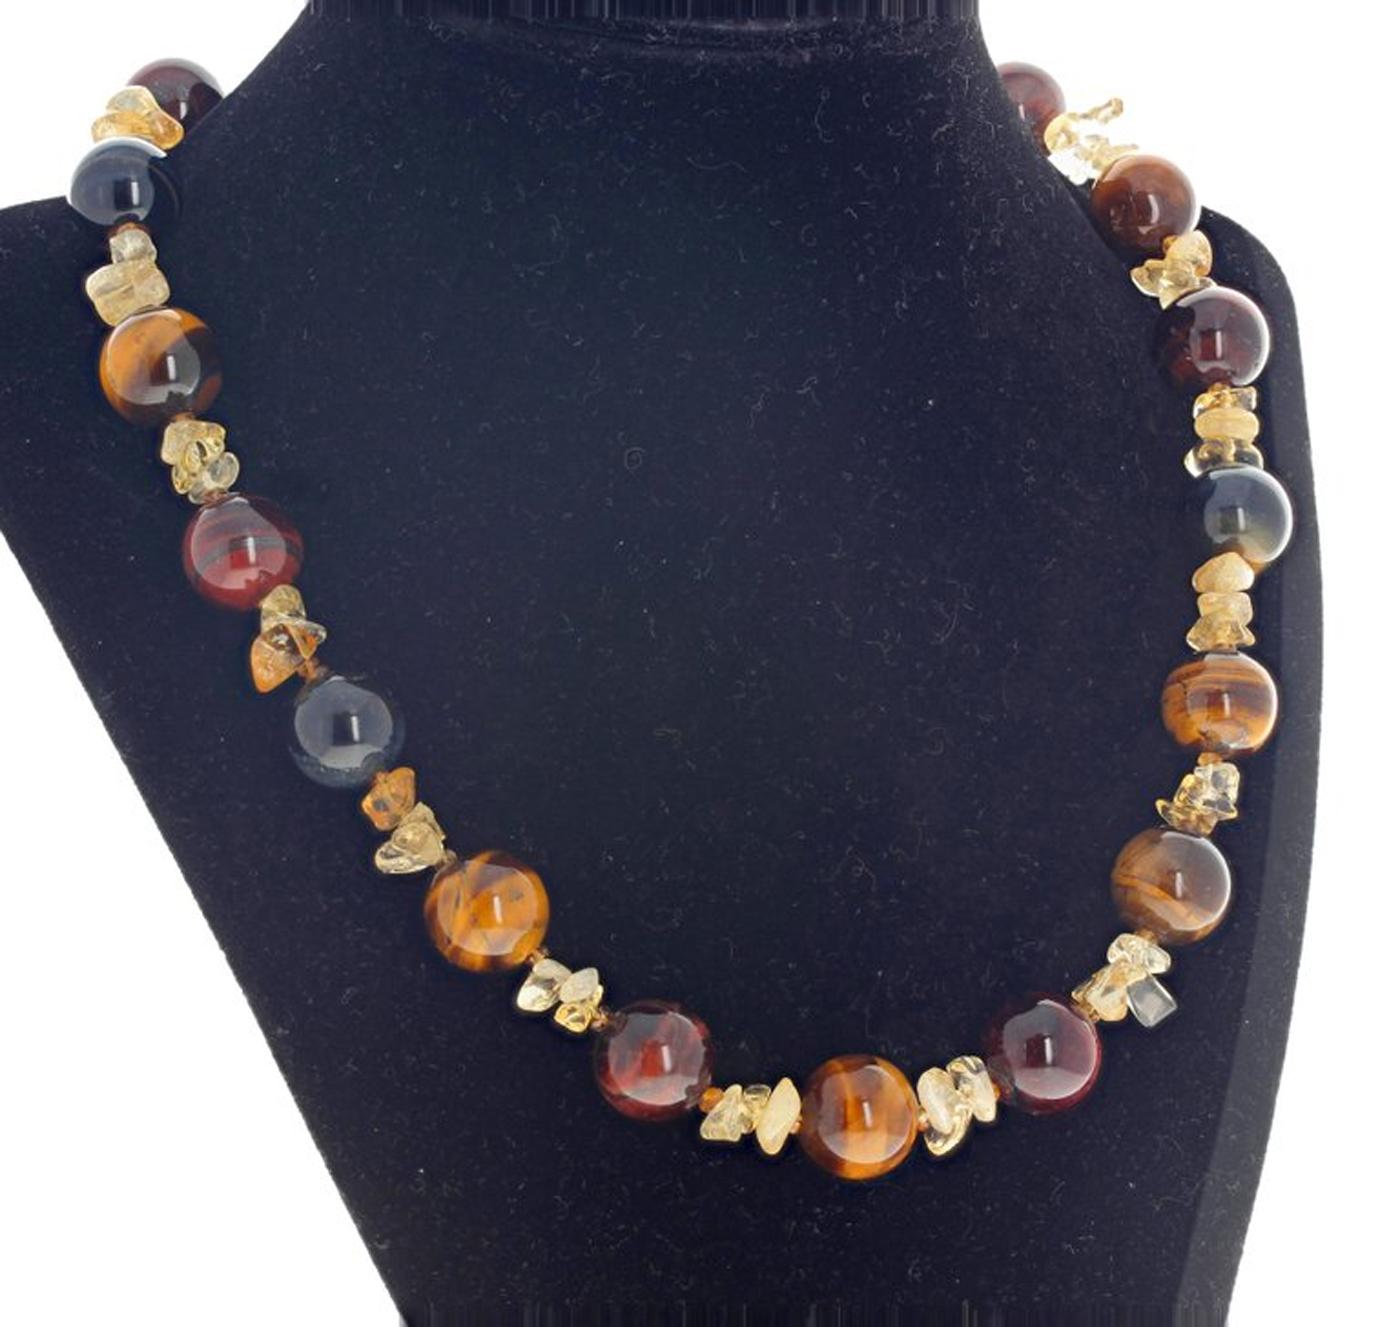 These beautiful highly polished 14 mm round TigerEye gems are enhanced with polished natural chunks of yellow Citrine and accented with tiny gem cut sparkling little Citrine gemstones. The Necklace is 17.5 inches long and the hook clasp is gold